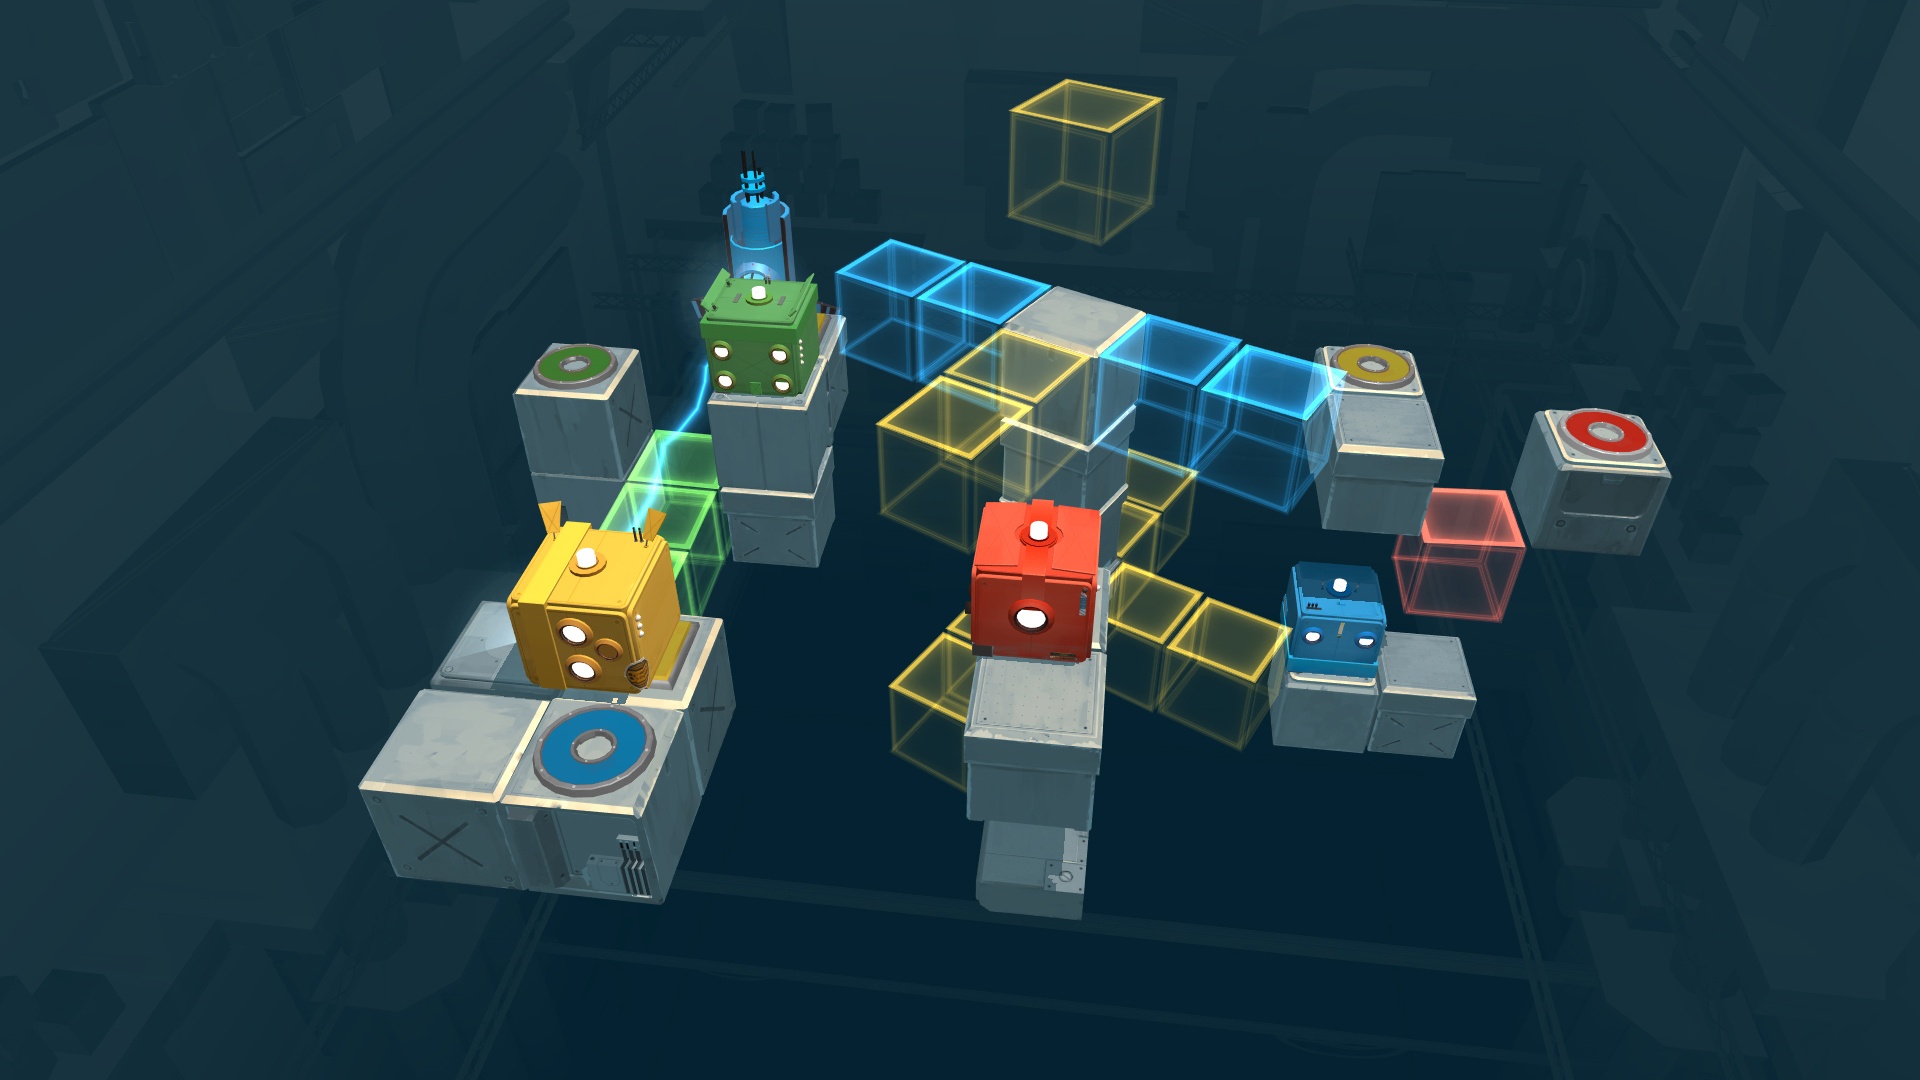 casual, co-op, Death Squared, Death Squared Review, Family, Funny, indie, Local Co-Op, multiplayer, party, Puzzle, SMG Studio, Xbox One, Xbox One Review